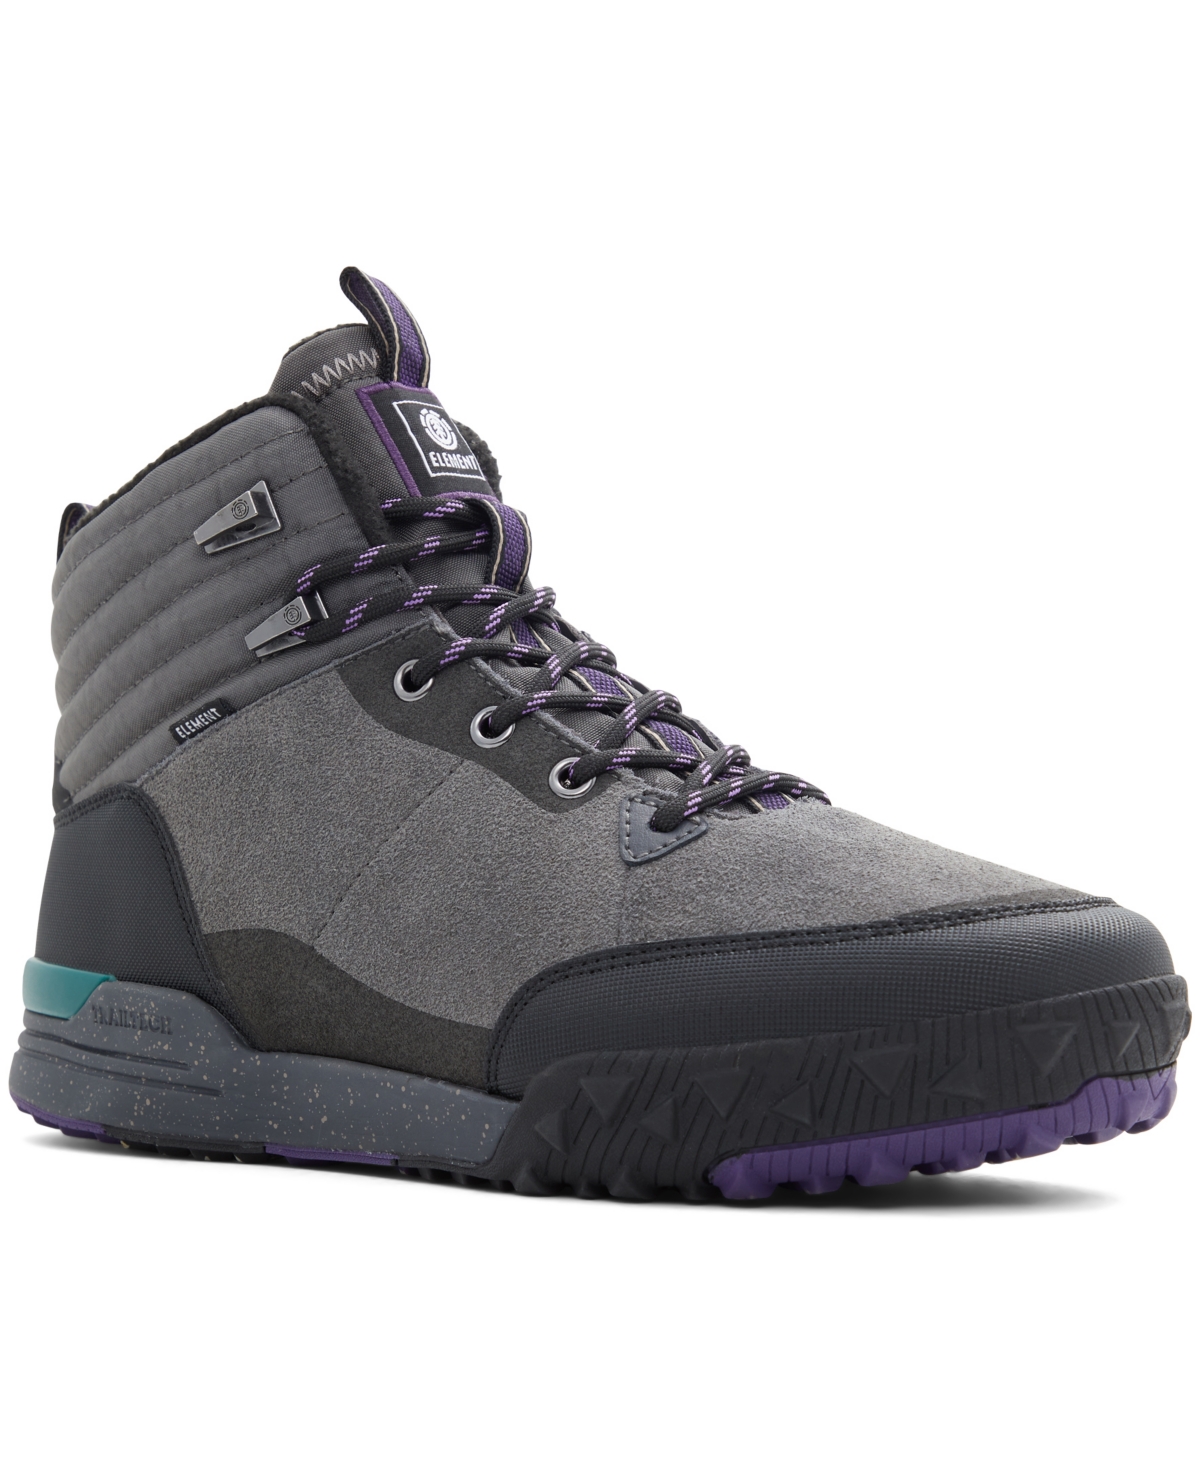 Men's Donnelly Ankle Boots - Charcoal